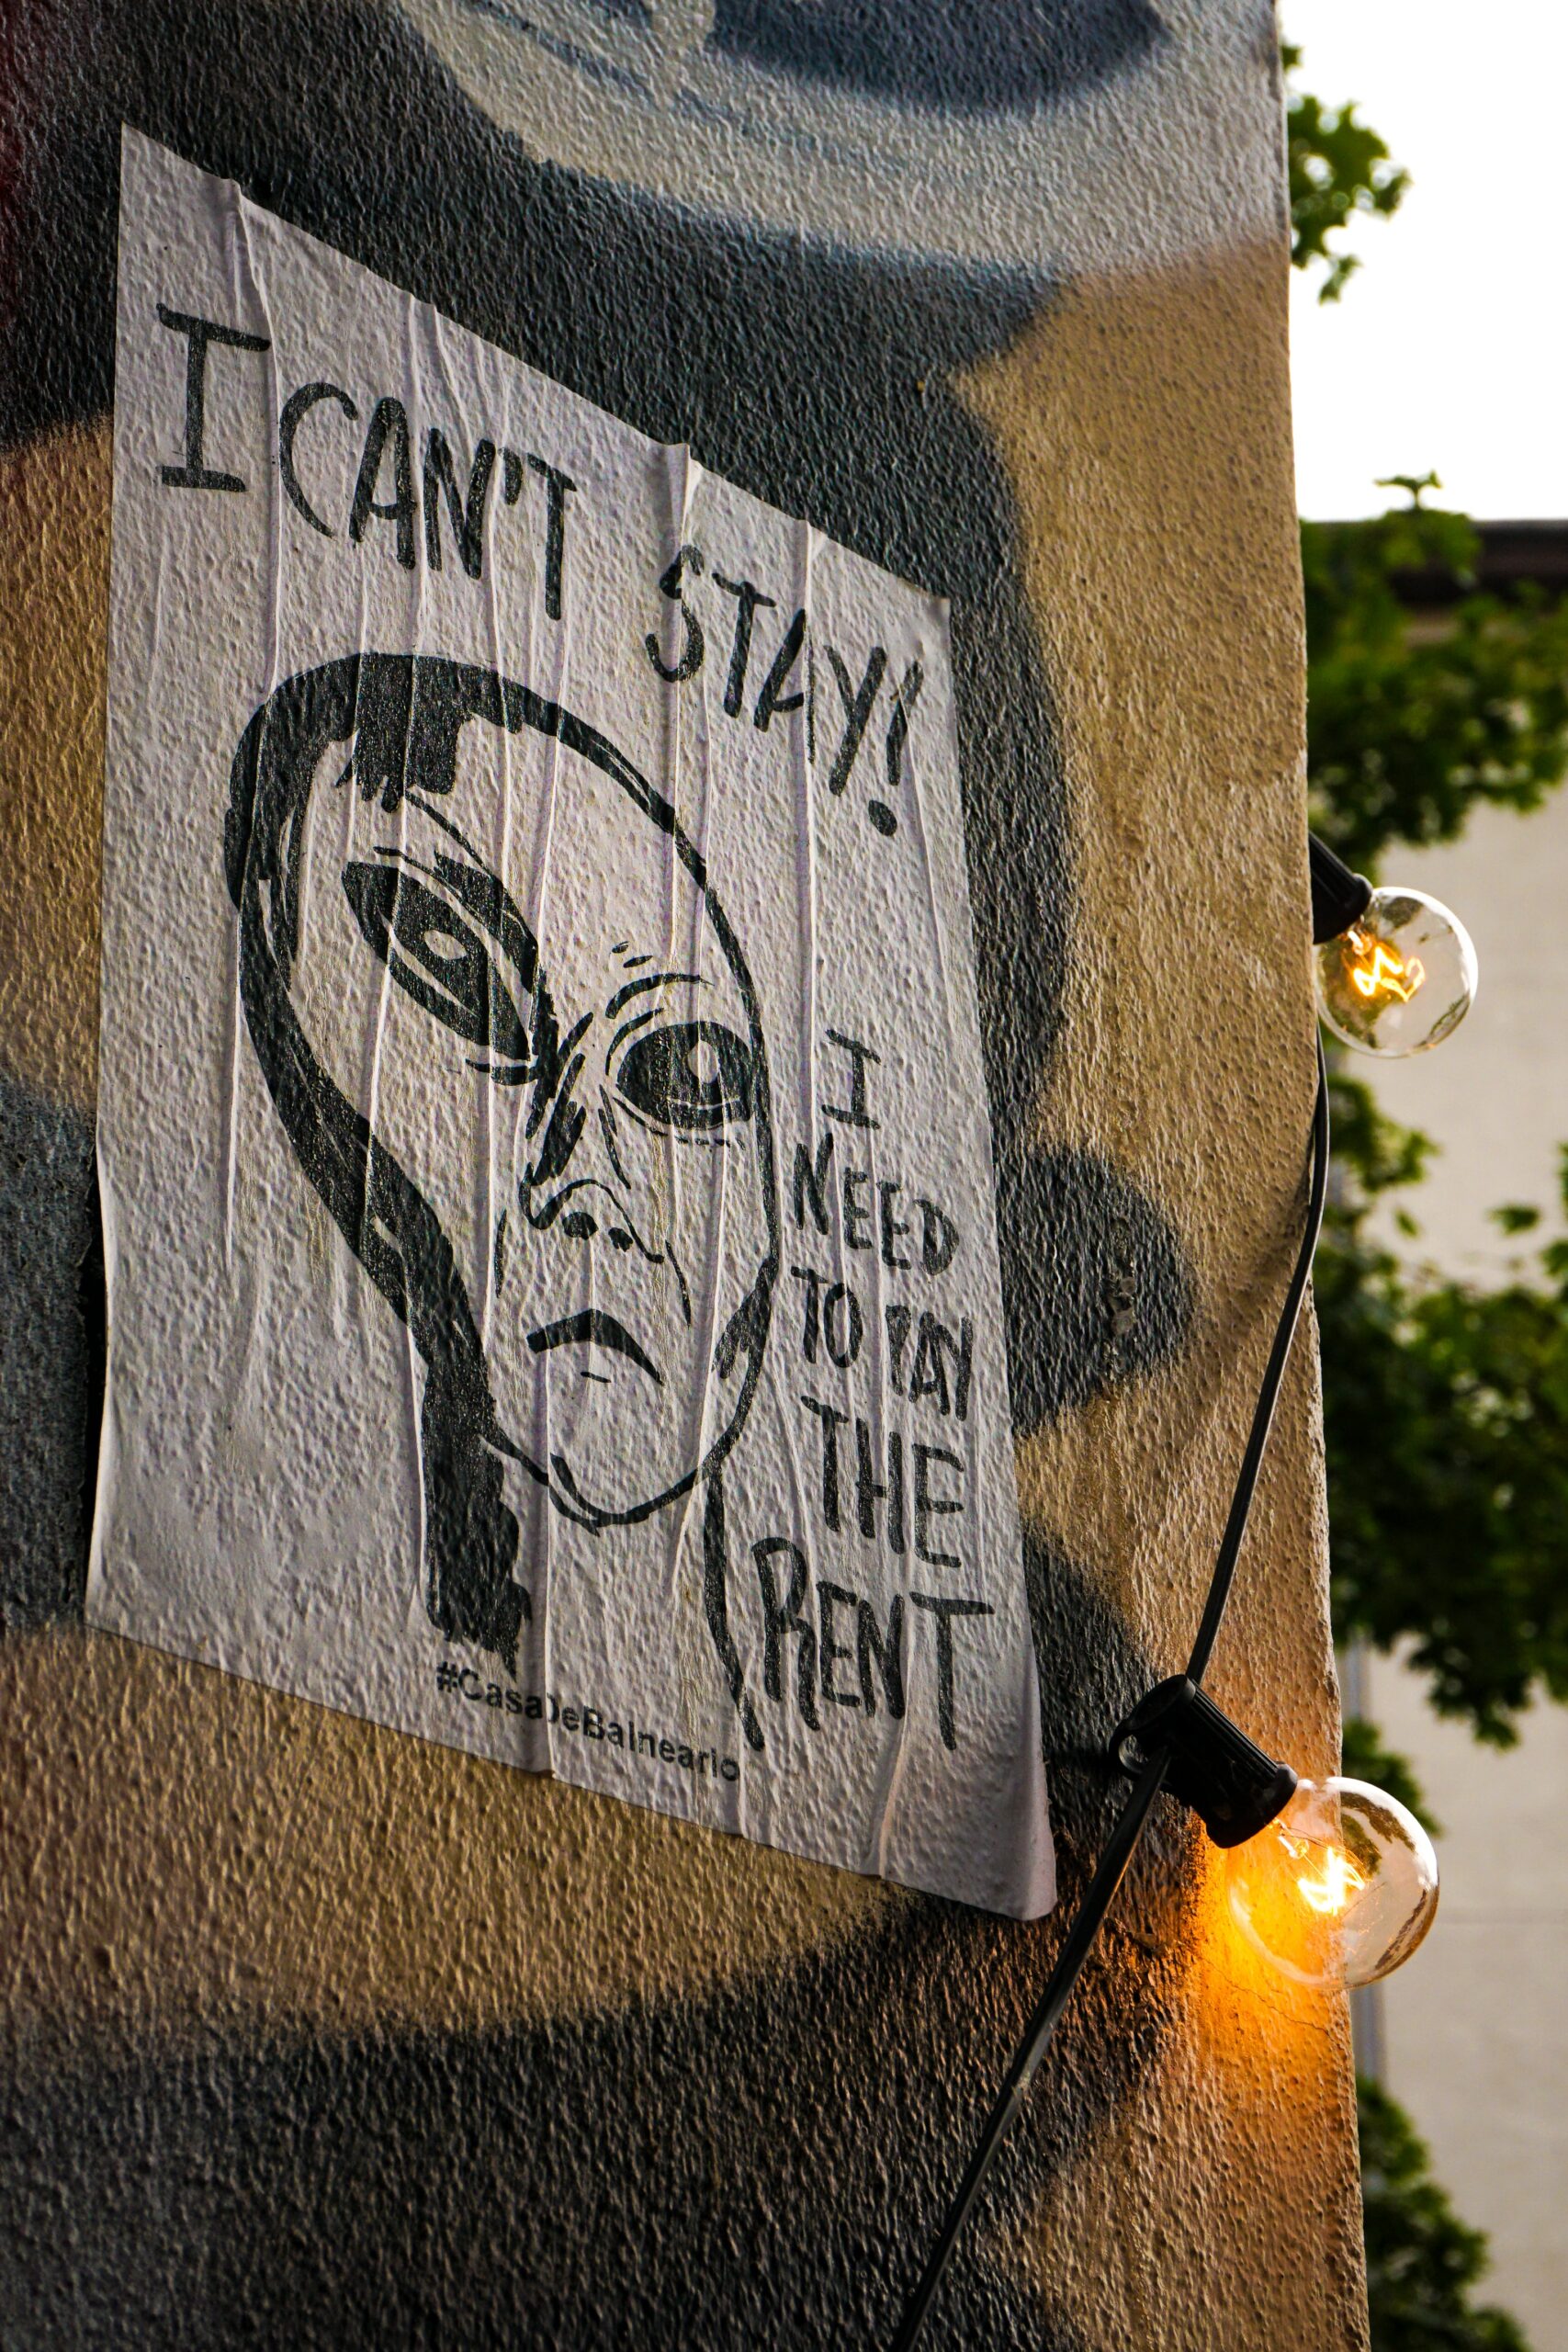 Poster with an alien illustration that says “I can’t stay! I need to pay the rent. #CasaDeBalneario”